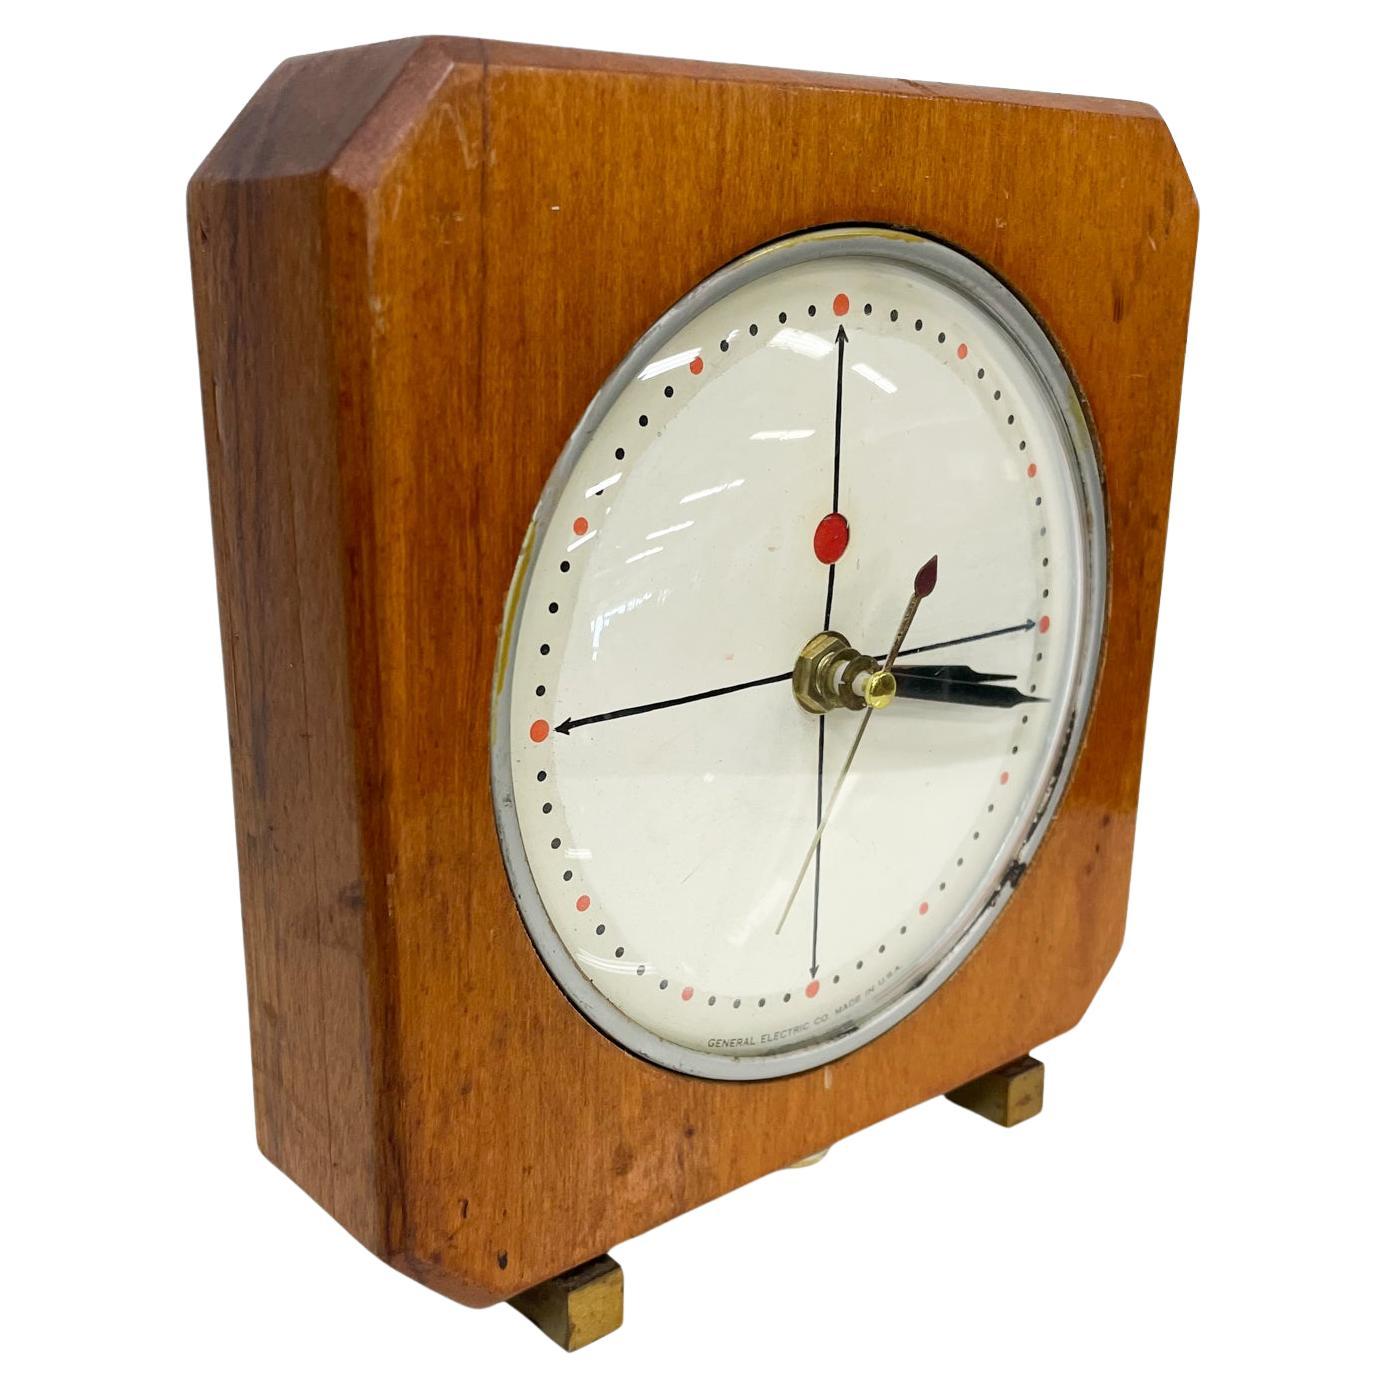 Clock
Mid-Century Modern wood clock with concave glass cover.
General Electric Company
Retrofitted from original electrical mechanism to new quartz battery operated movement.
Measures: 7.38 tall x 6.75 width x 2.25 depth
Preowned vintage